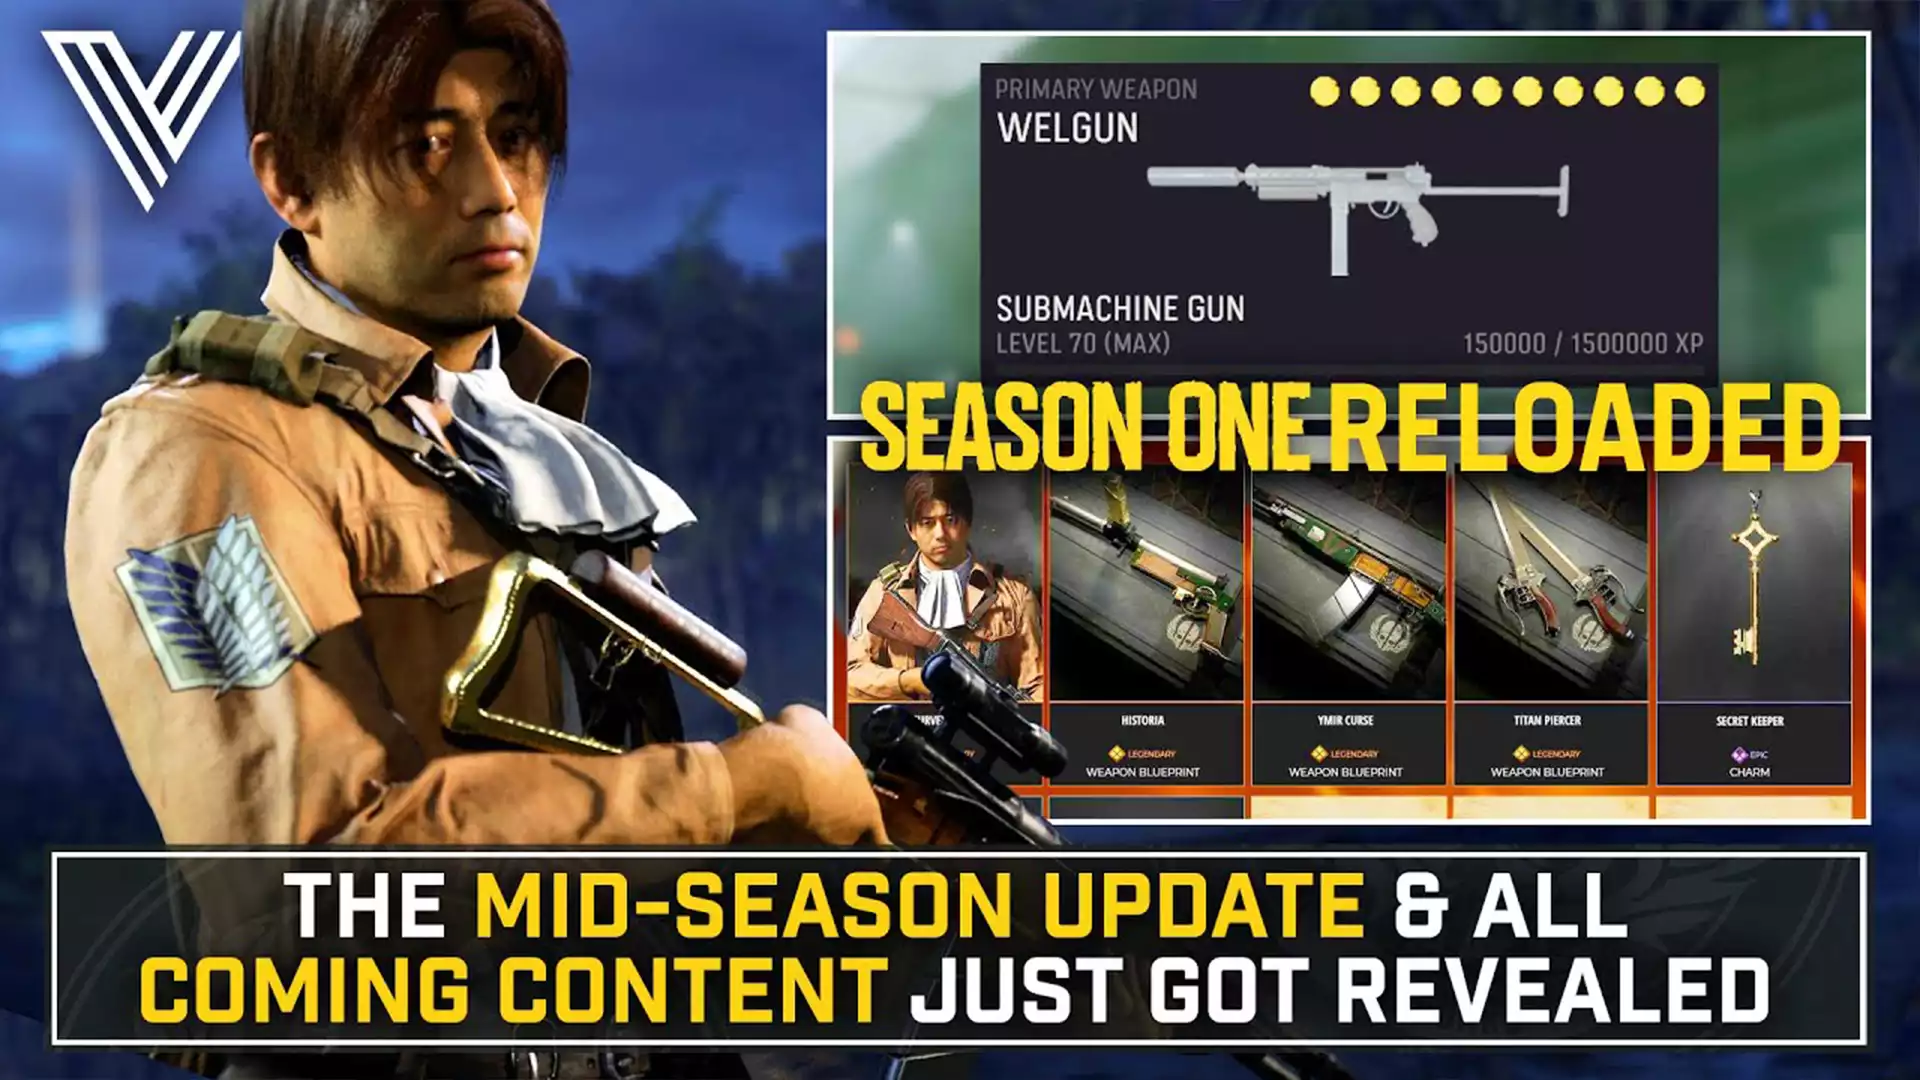 Season 1 Reloaded starts today - All about the Mid-Season Update